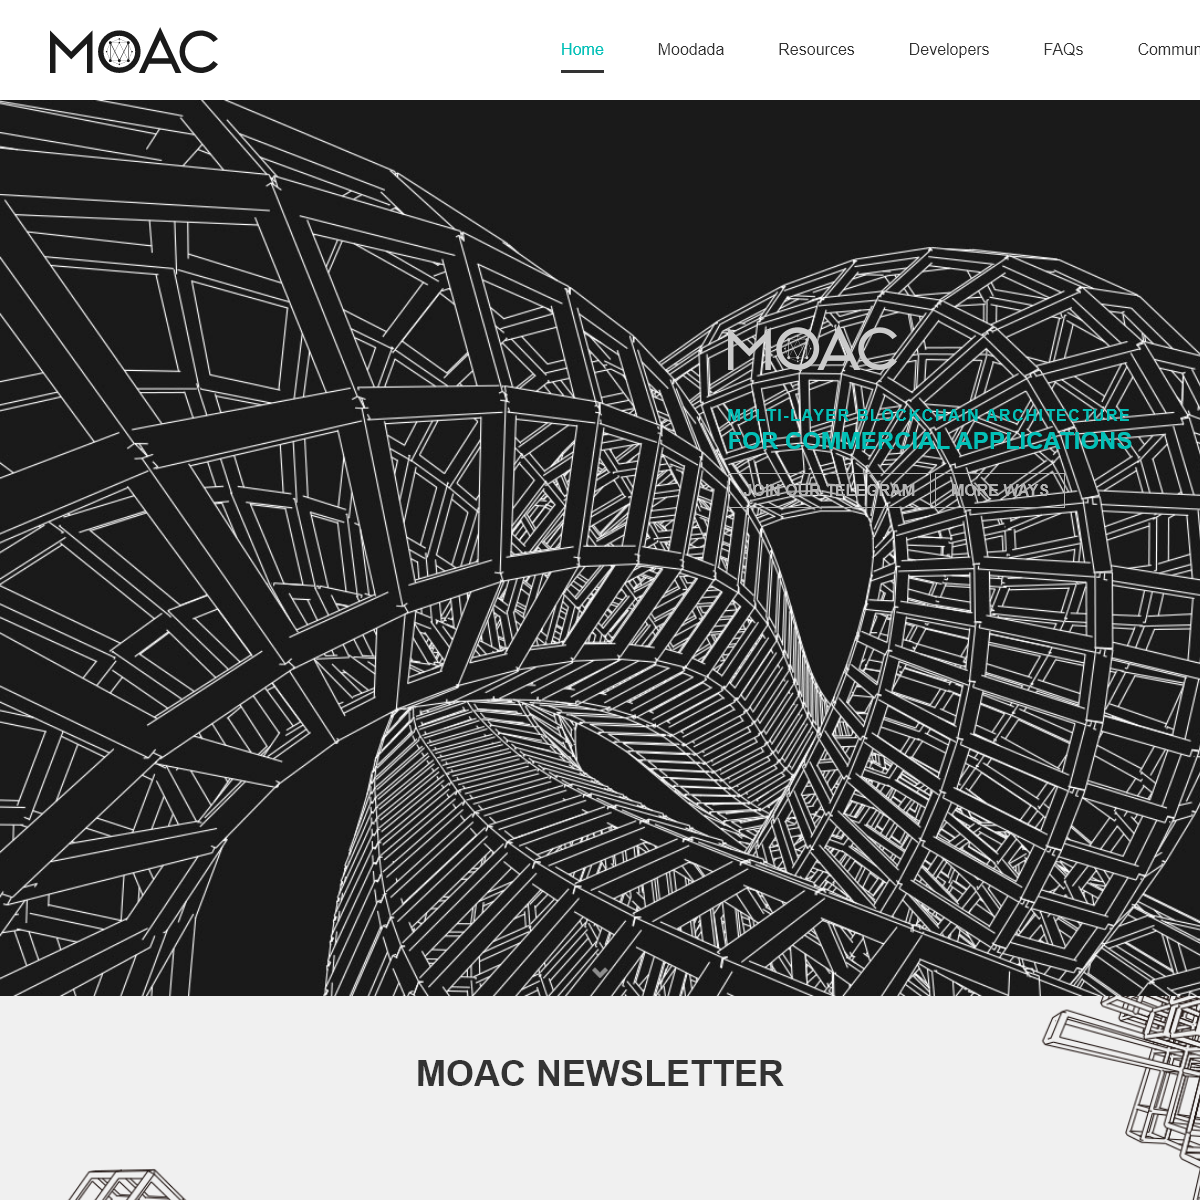 A complete backup of moac.io